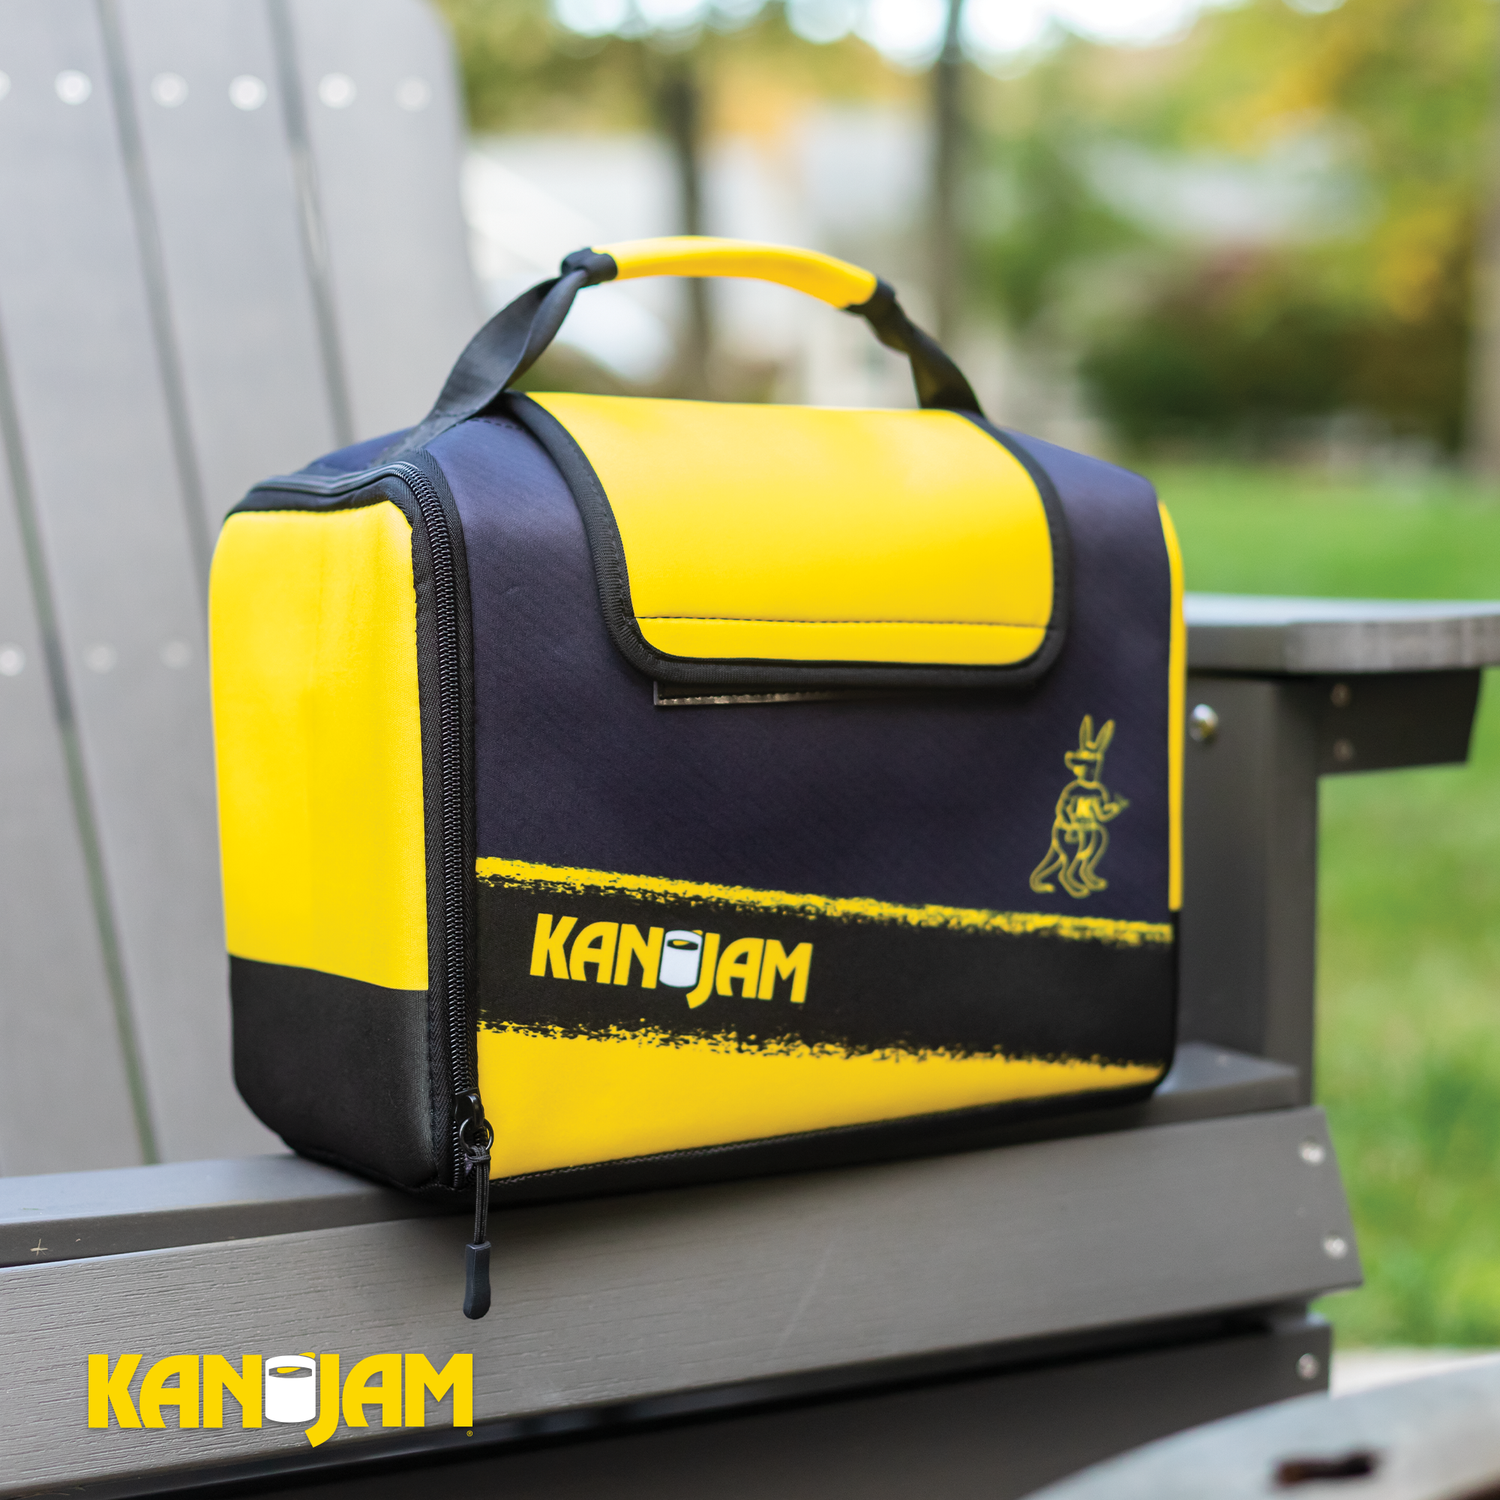 Kanga Insulated Cooler Bag - Soft Cooler Bag - Can Beer and Seltzer Drink  Cooler - Insulated and Durability Tested - Kanga Kase Mate